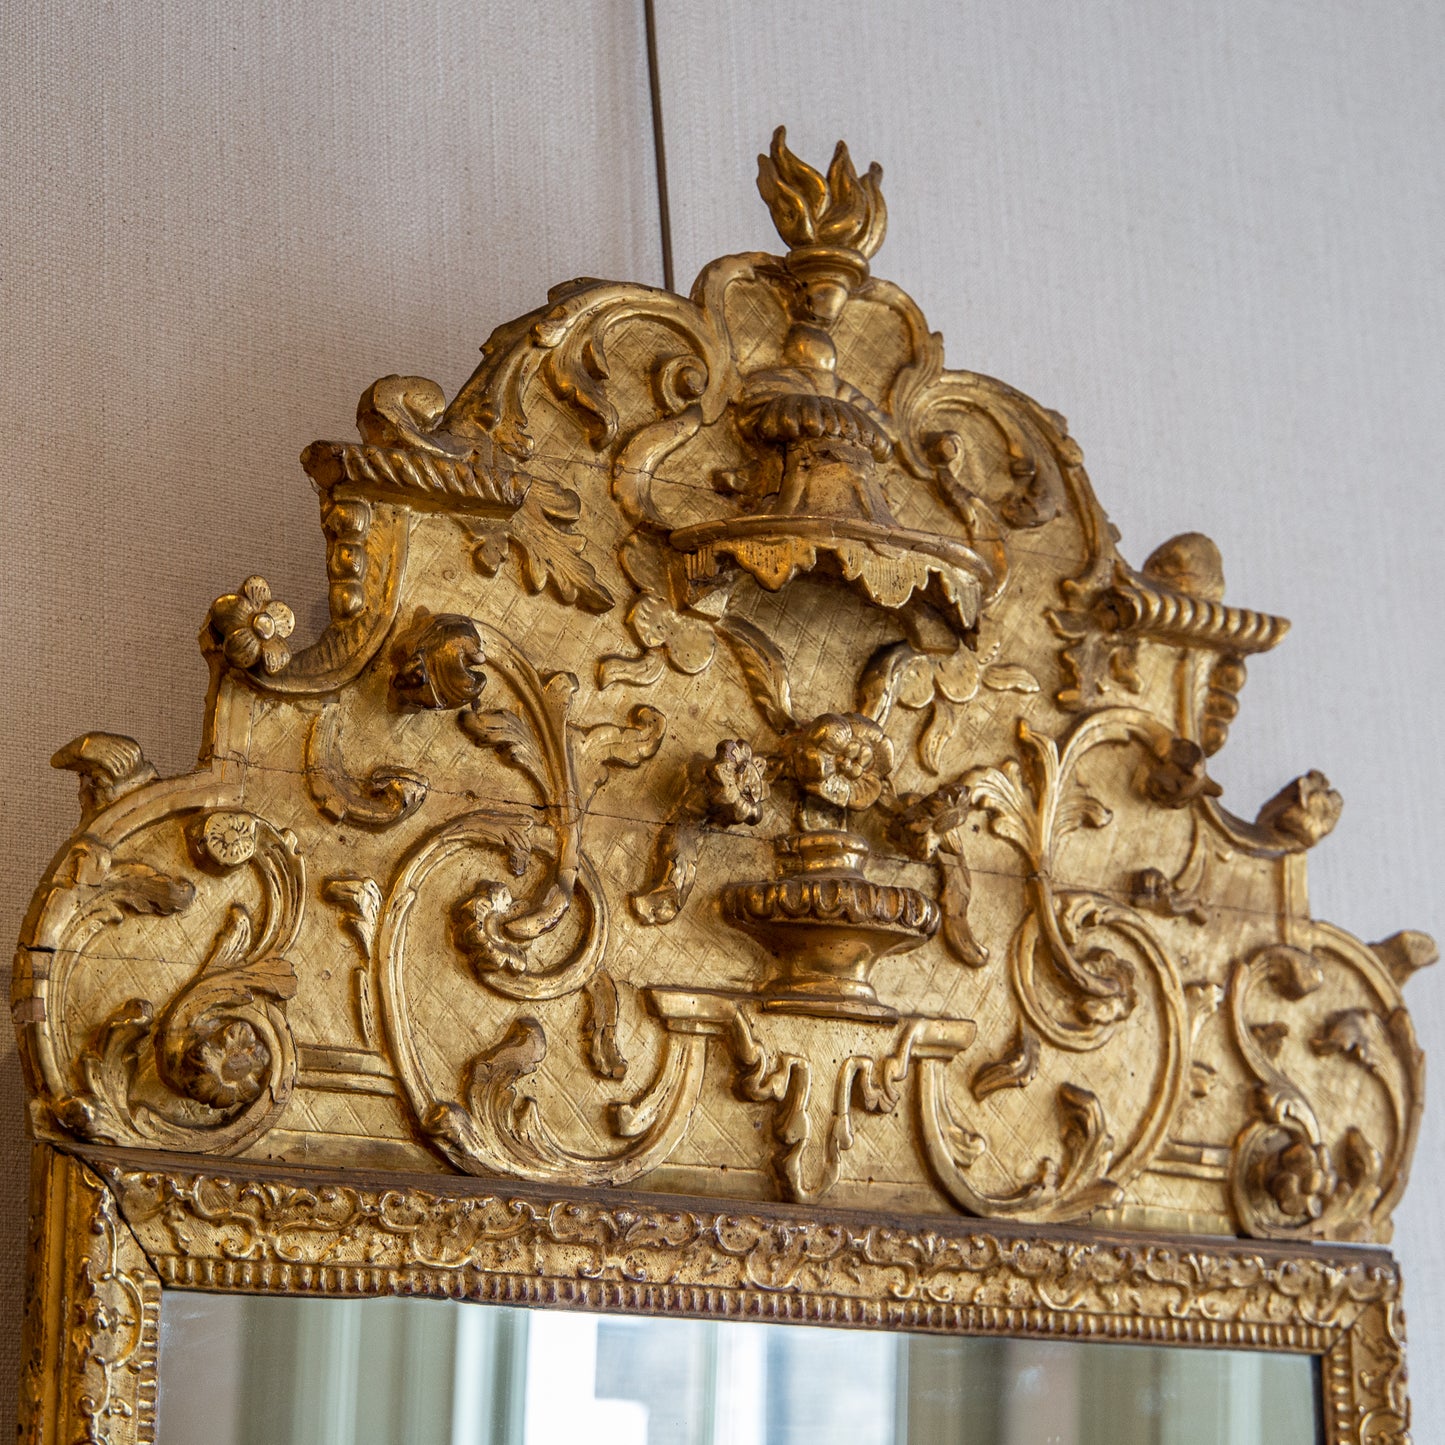 A Large Louis XIV Style Gilded Mirror with Elaborate Cresting